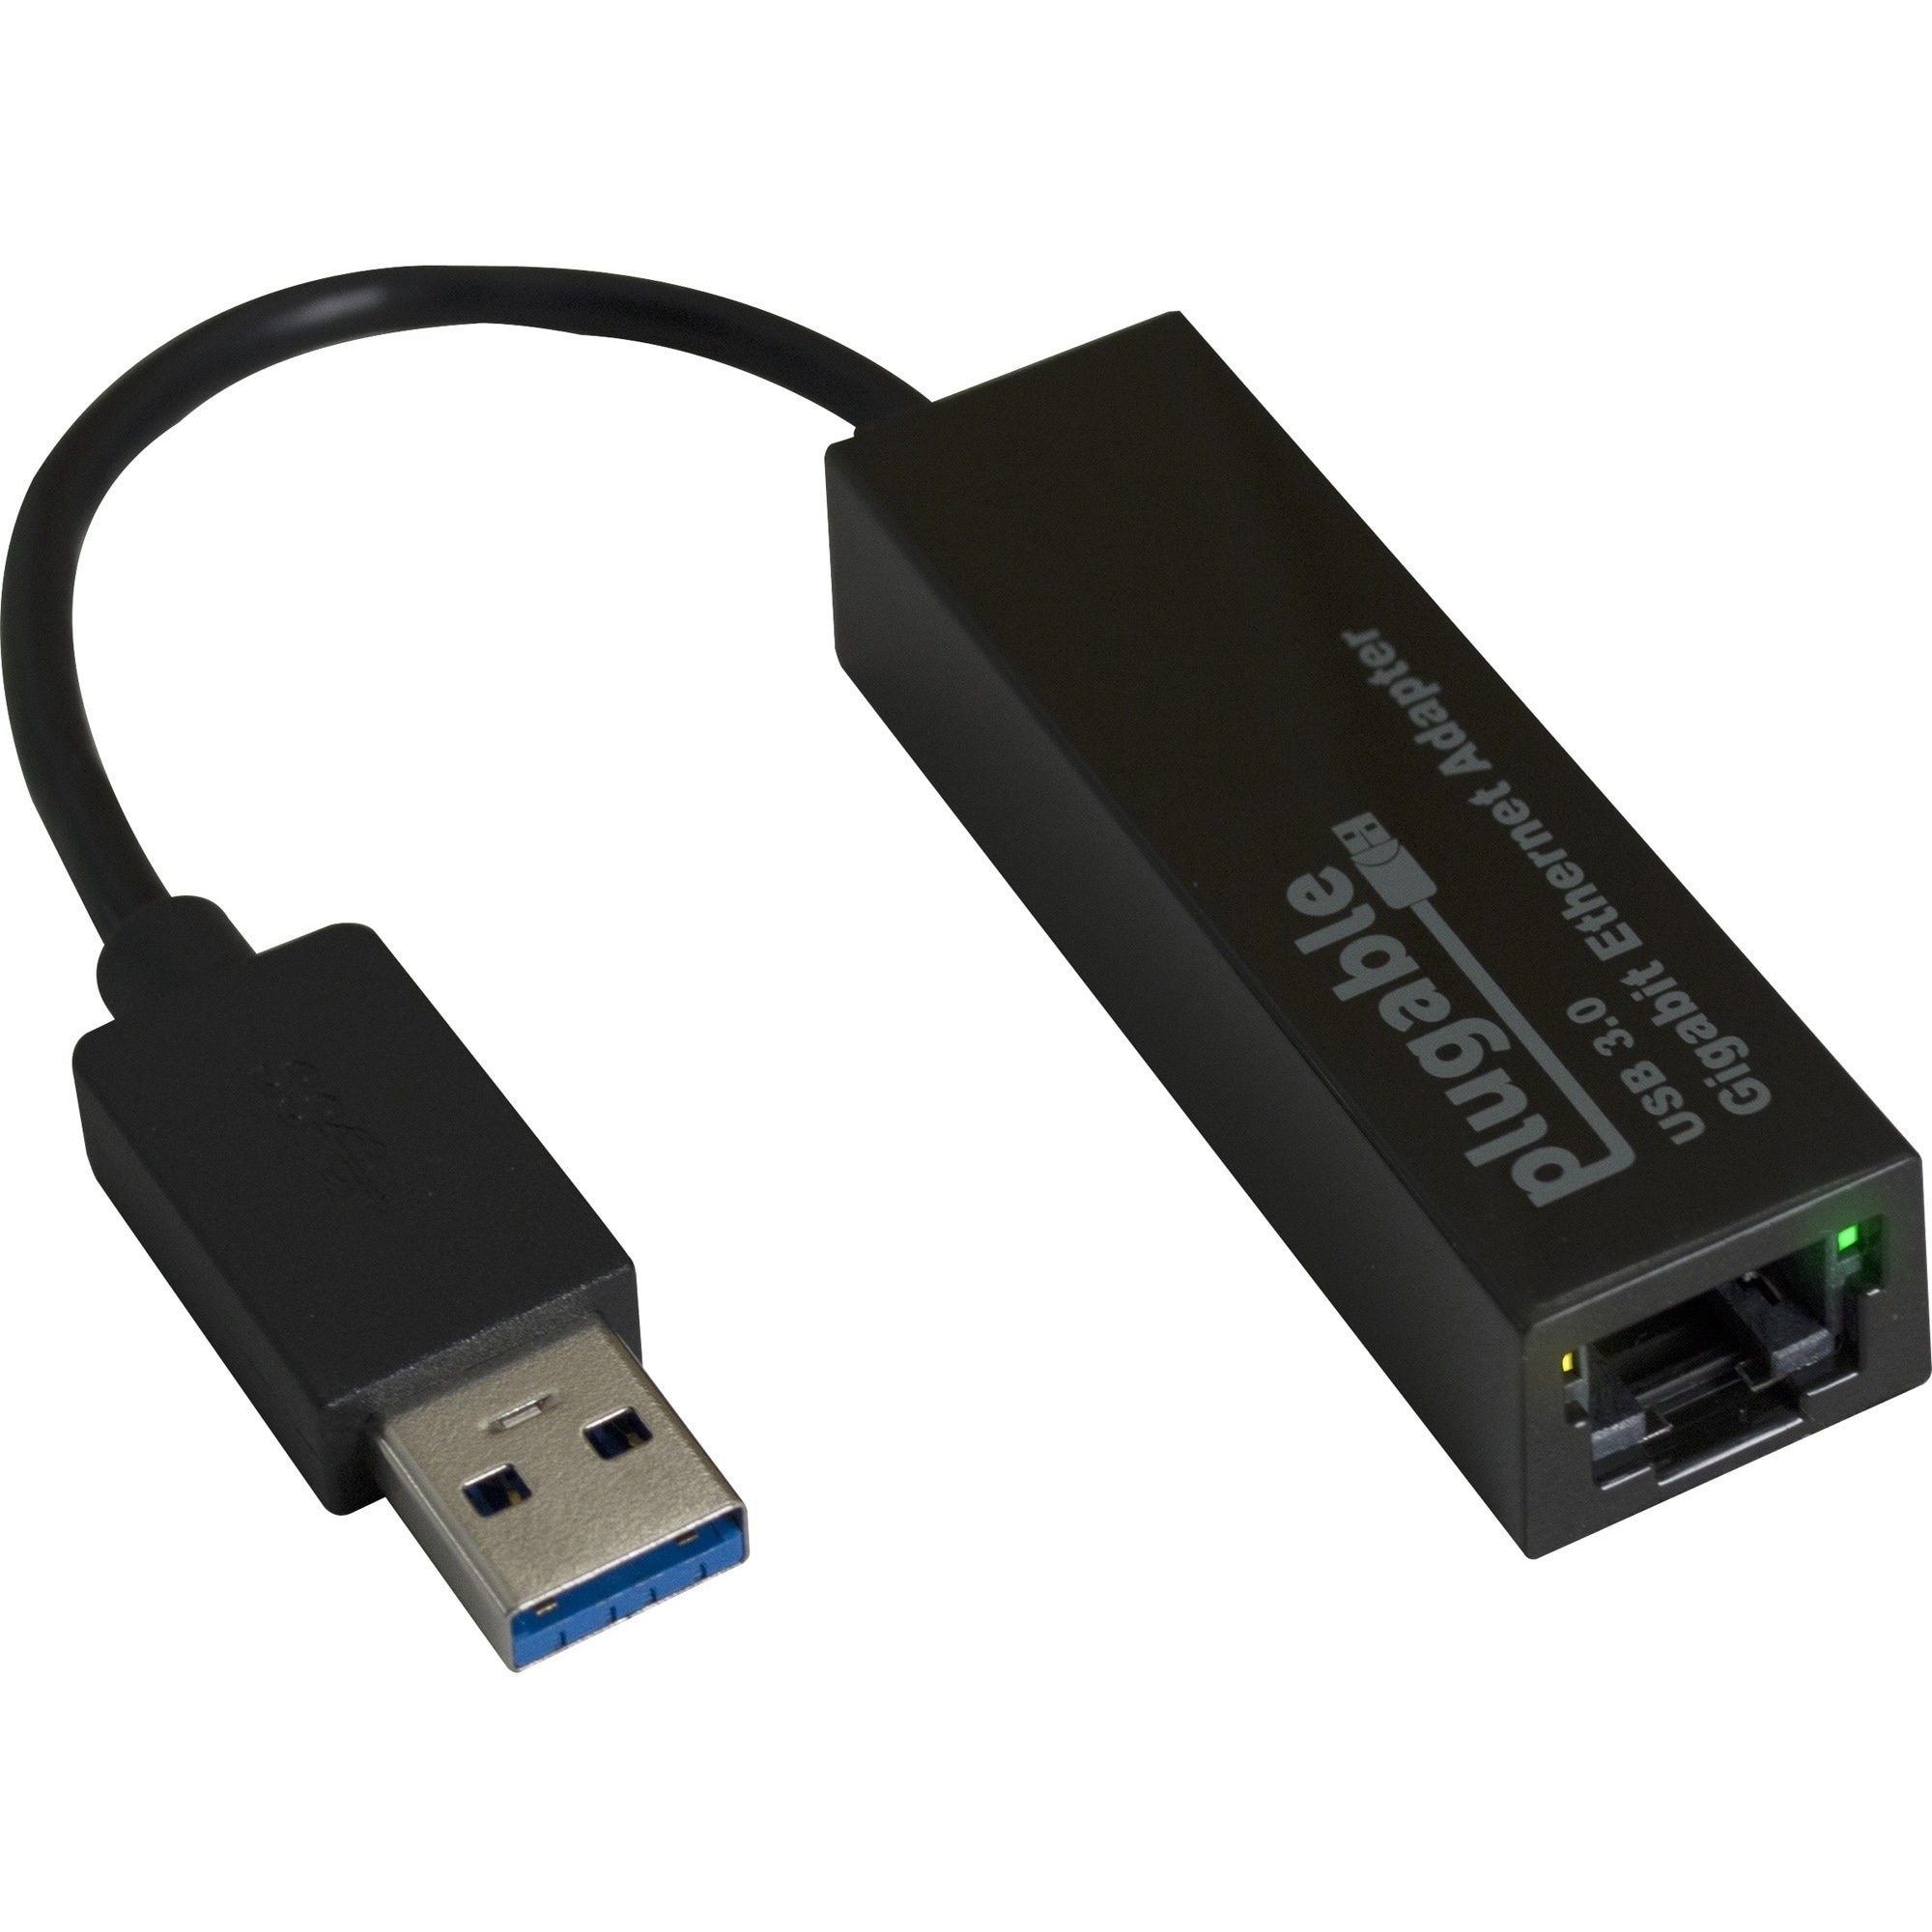 asix ax88179 usb 3.0 to gigabit ethernet adapter driver download